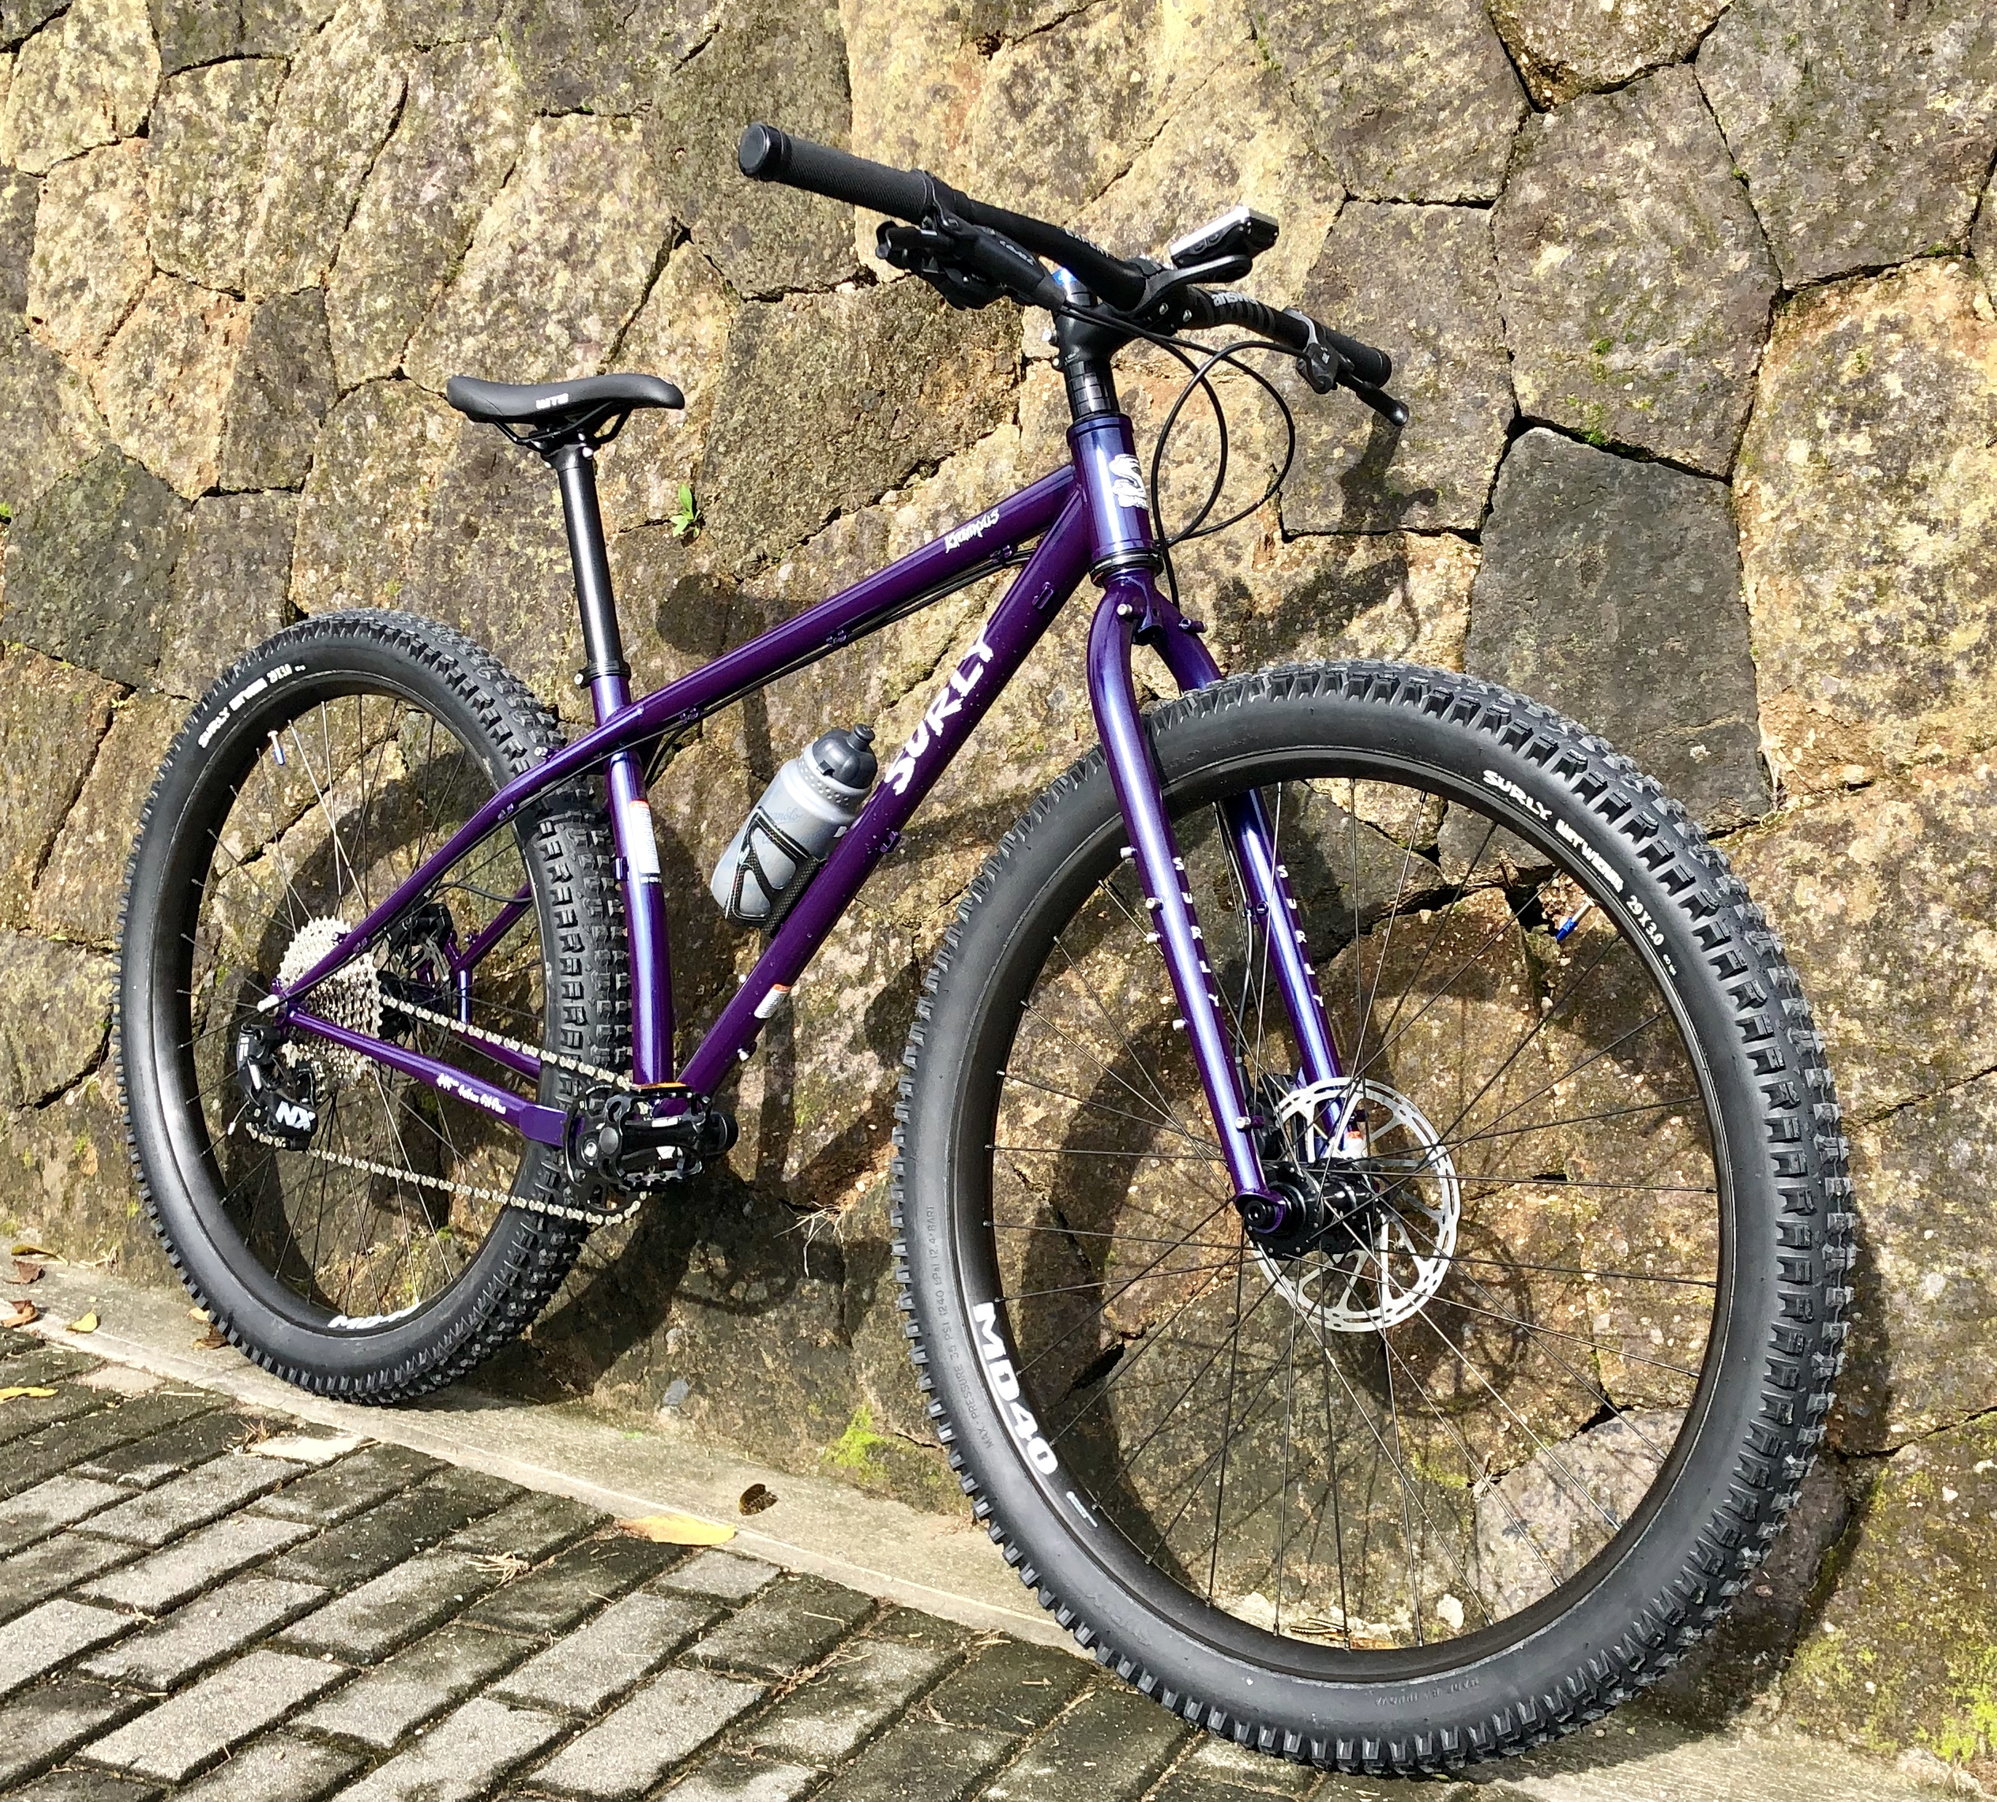 bike without suspension